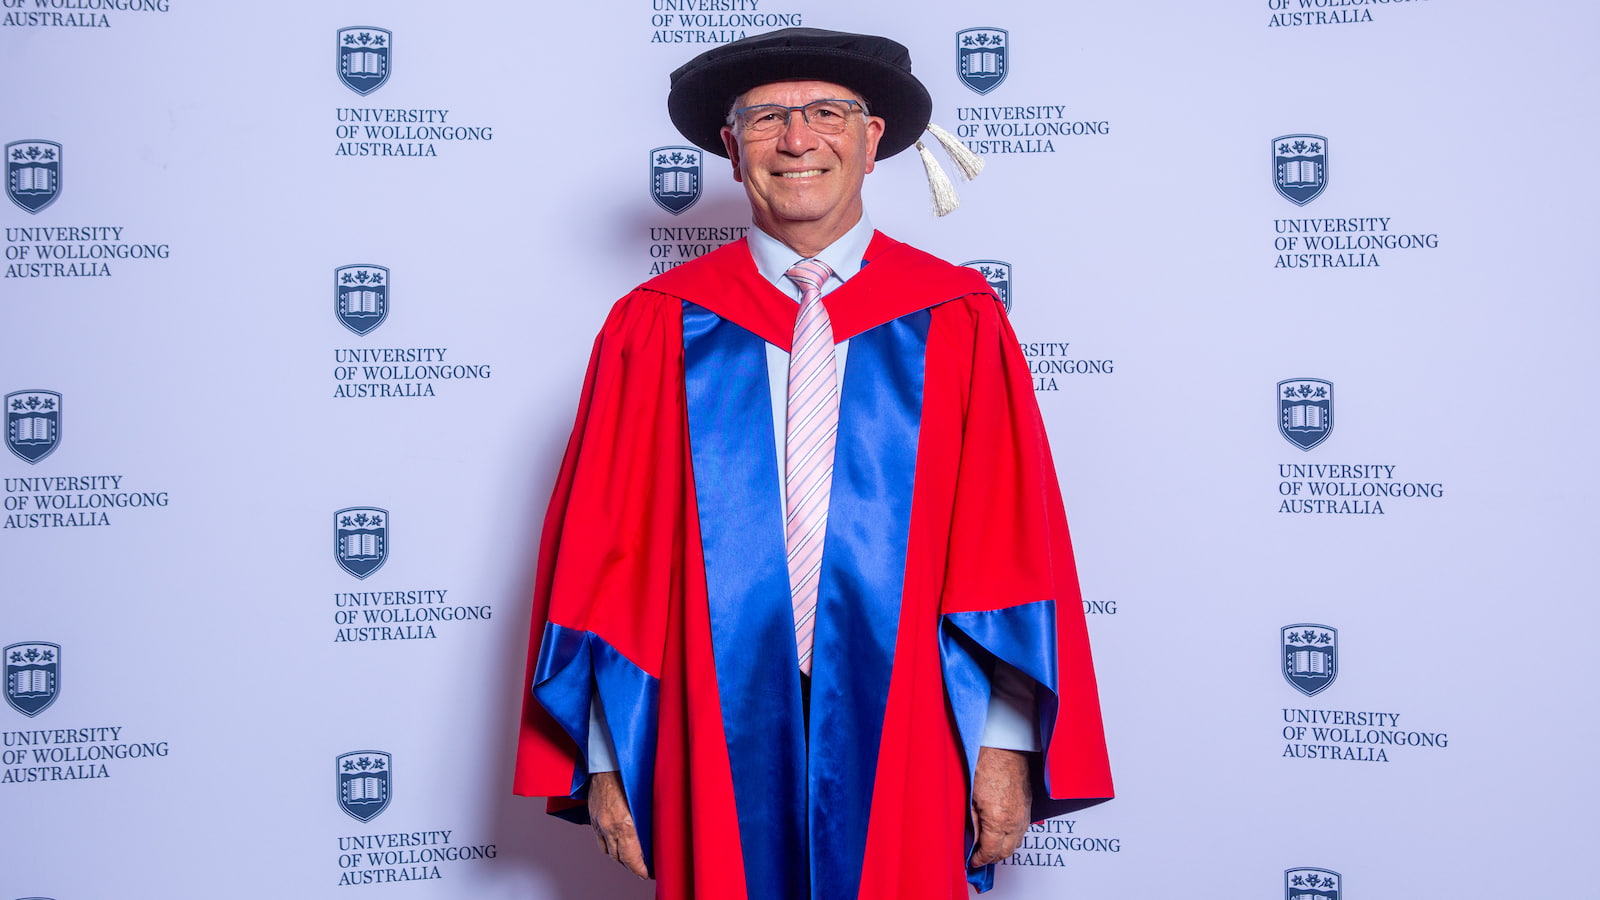 Professor Joe Chicharo stands against a UOW backdrop, wearing a blue and red graduation gown and cap. Photo: Andy Zakeli